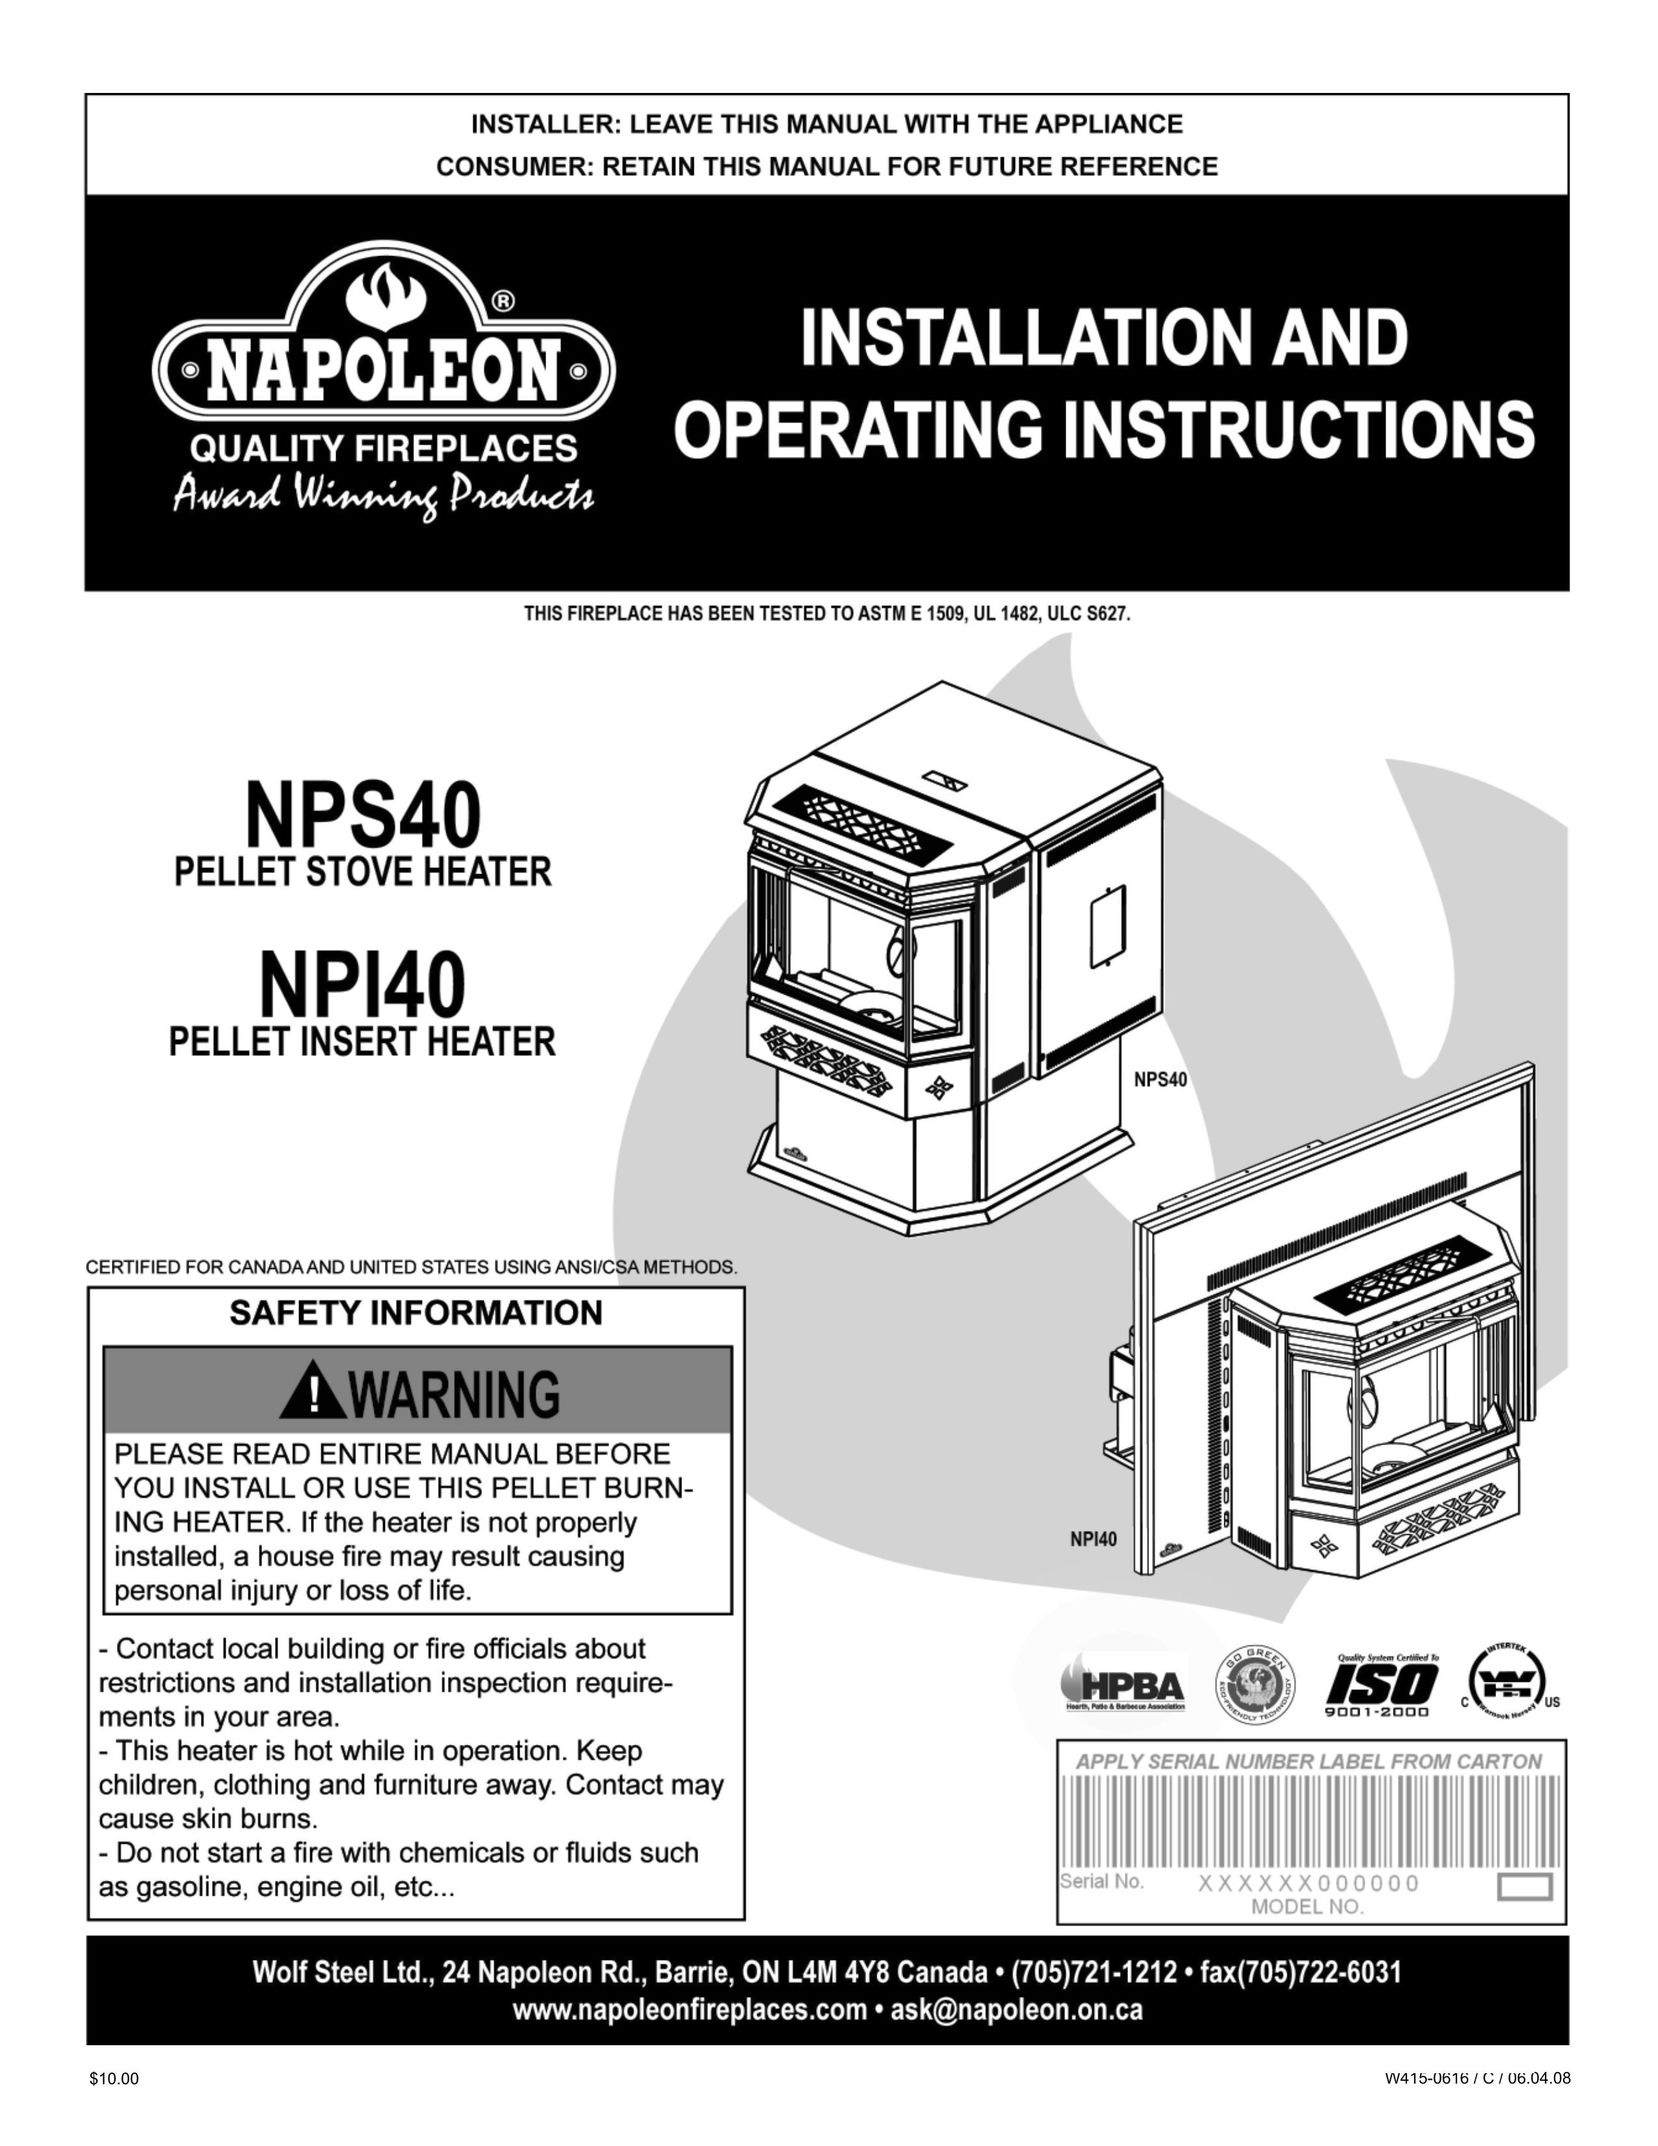 Napoleon Fireplaces NPI40 Air Conditioner User Manual